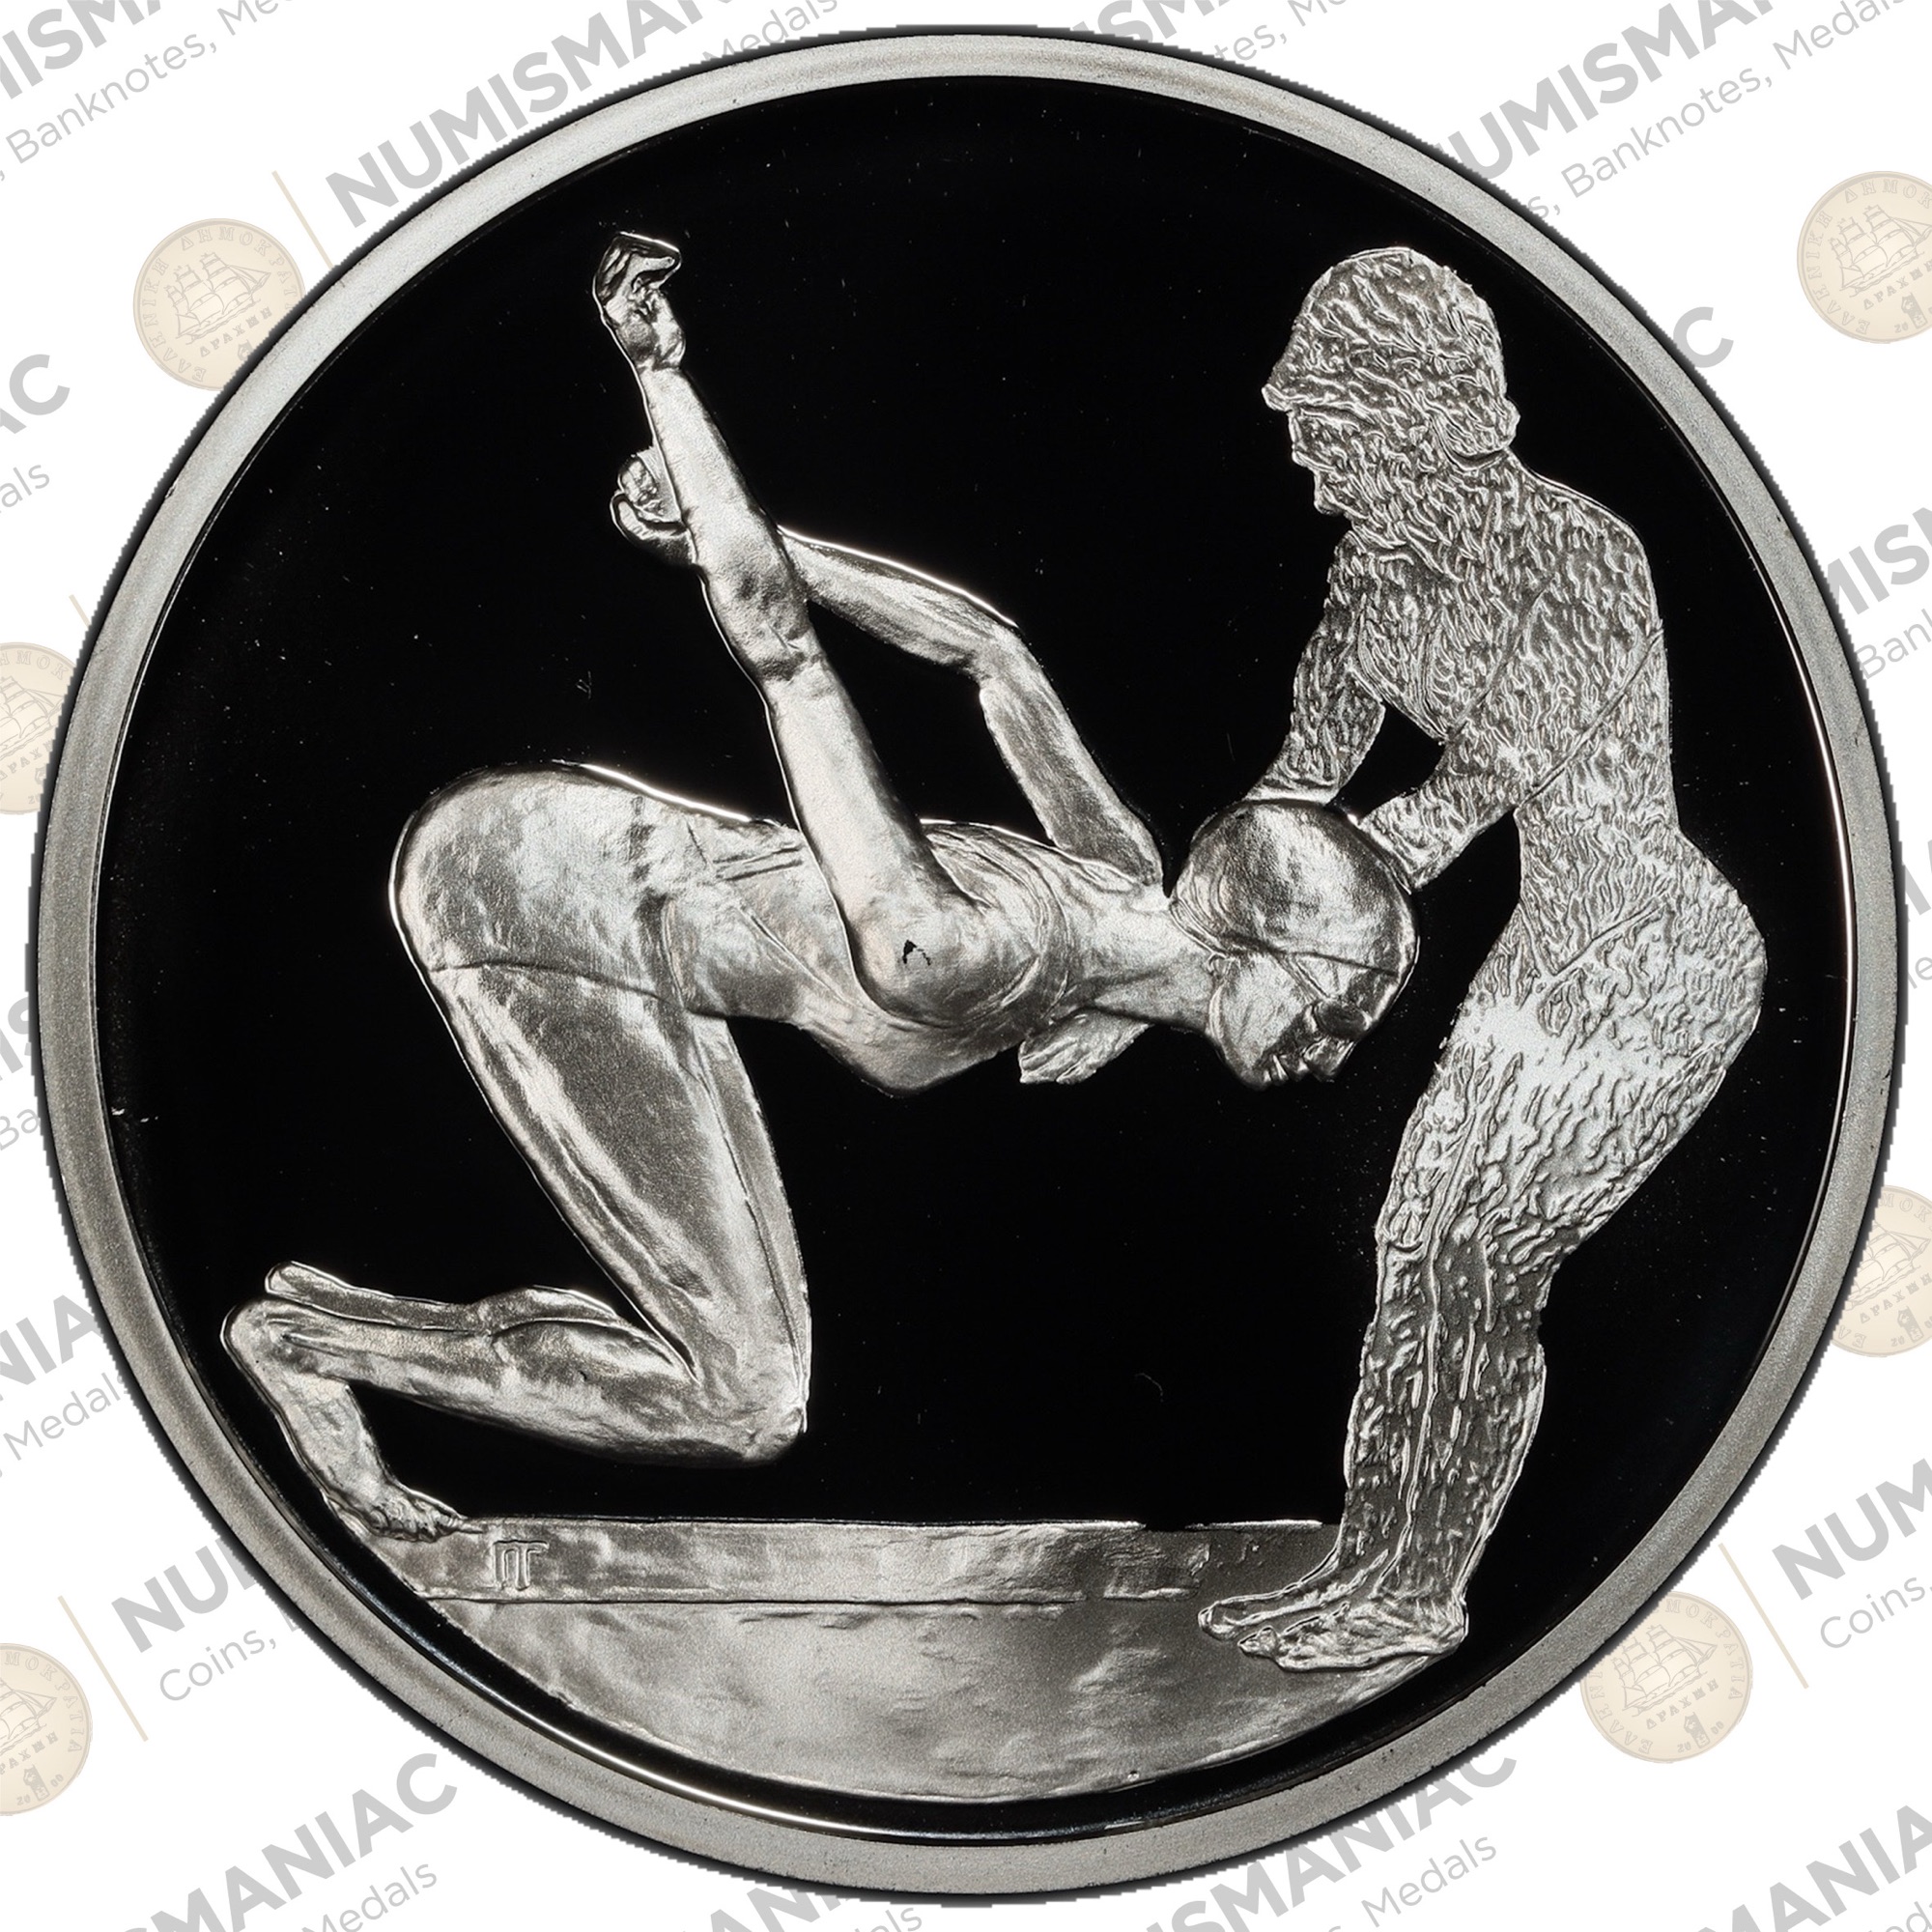 Greece 🇬🇷 10 Euro 2003 "Swimming" 1oz Silver Bullion Proof Coin with capsule. A